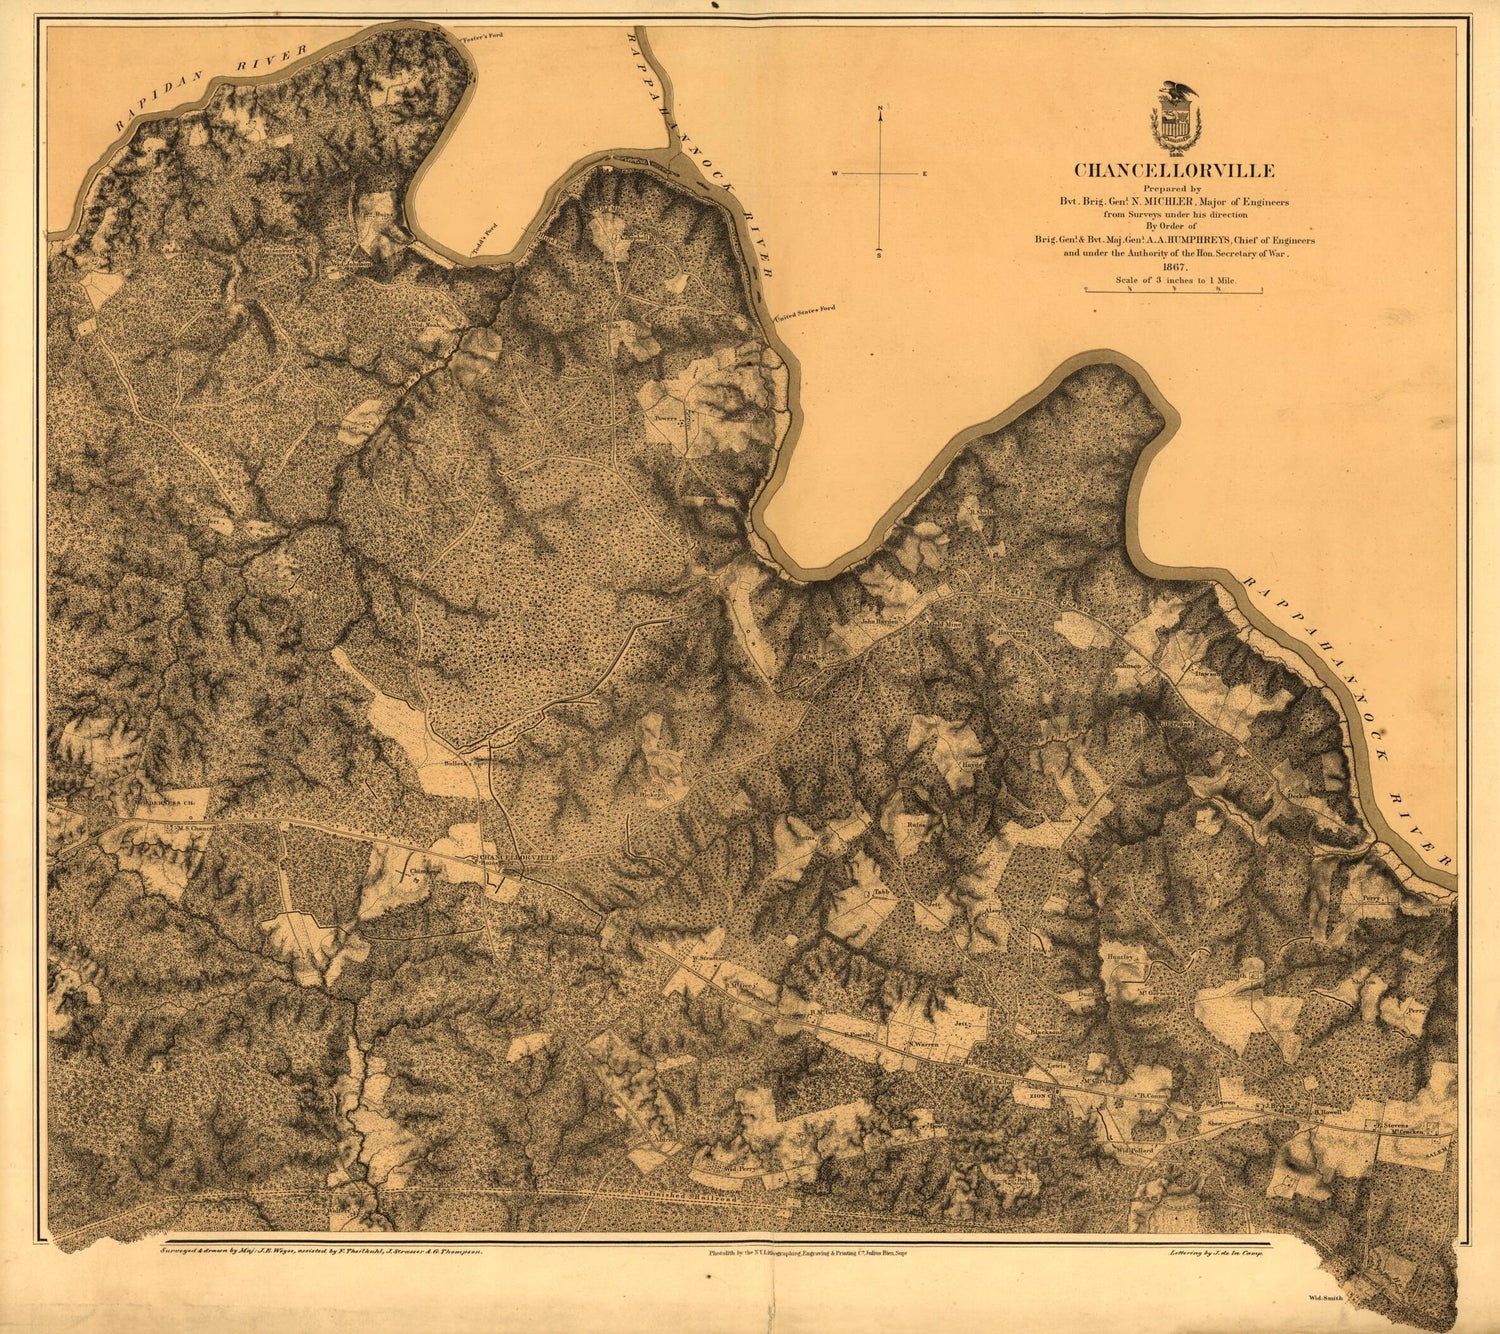 This old map of 3, from 1863 was created by N. (Nathaniel) Michler in 1863